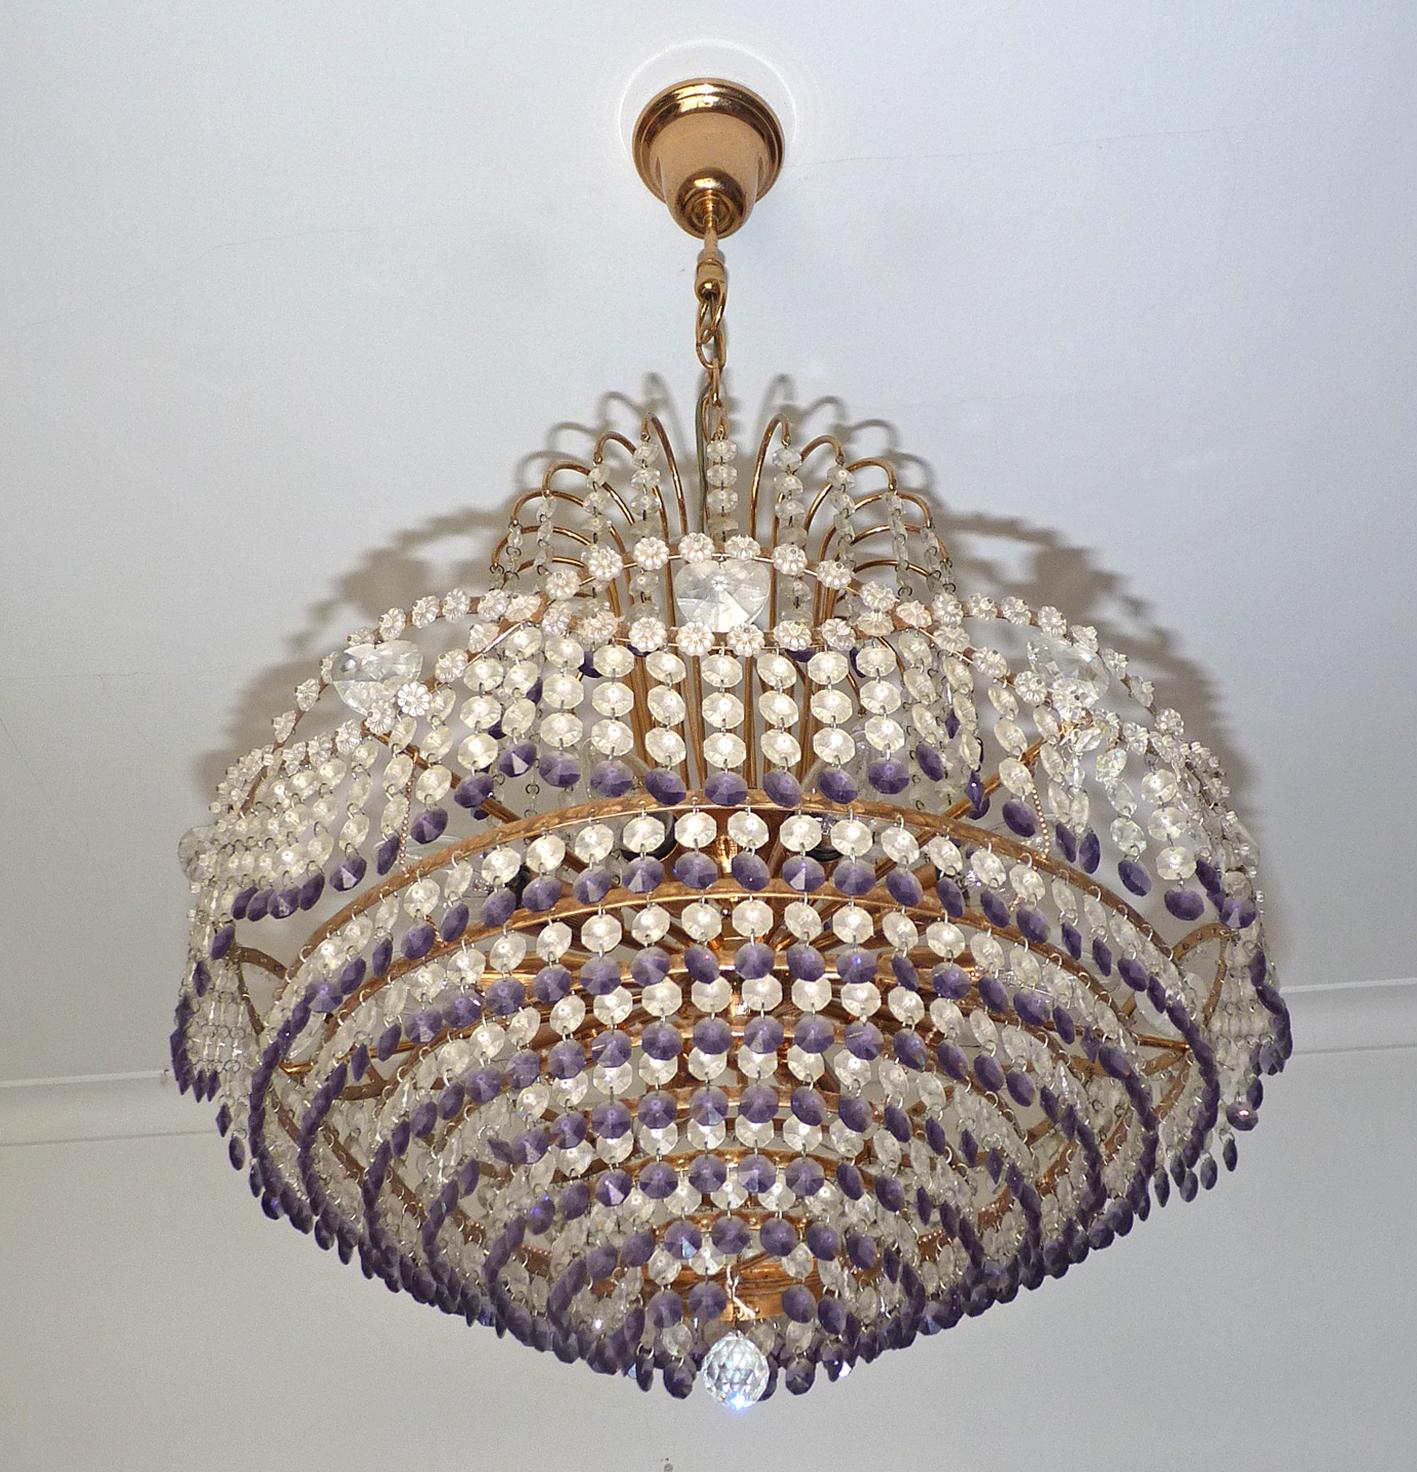 Stunning French Hollywood Regency Empire amethyst cut crystal and gilt brass 10-light chandelier with crystal drops and swags
Measures:
Diameter 21.3 in/ 54 cm
Height 37.8 in / 96 cm
Weight 18 lb/8 Kg
Ten light bulbs E14/ good working